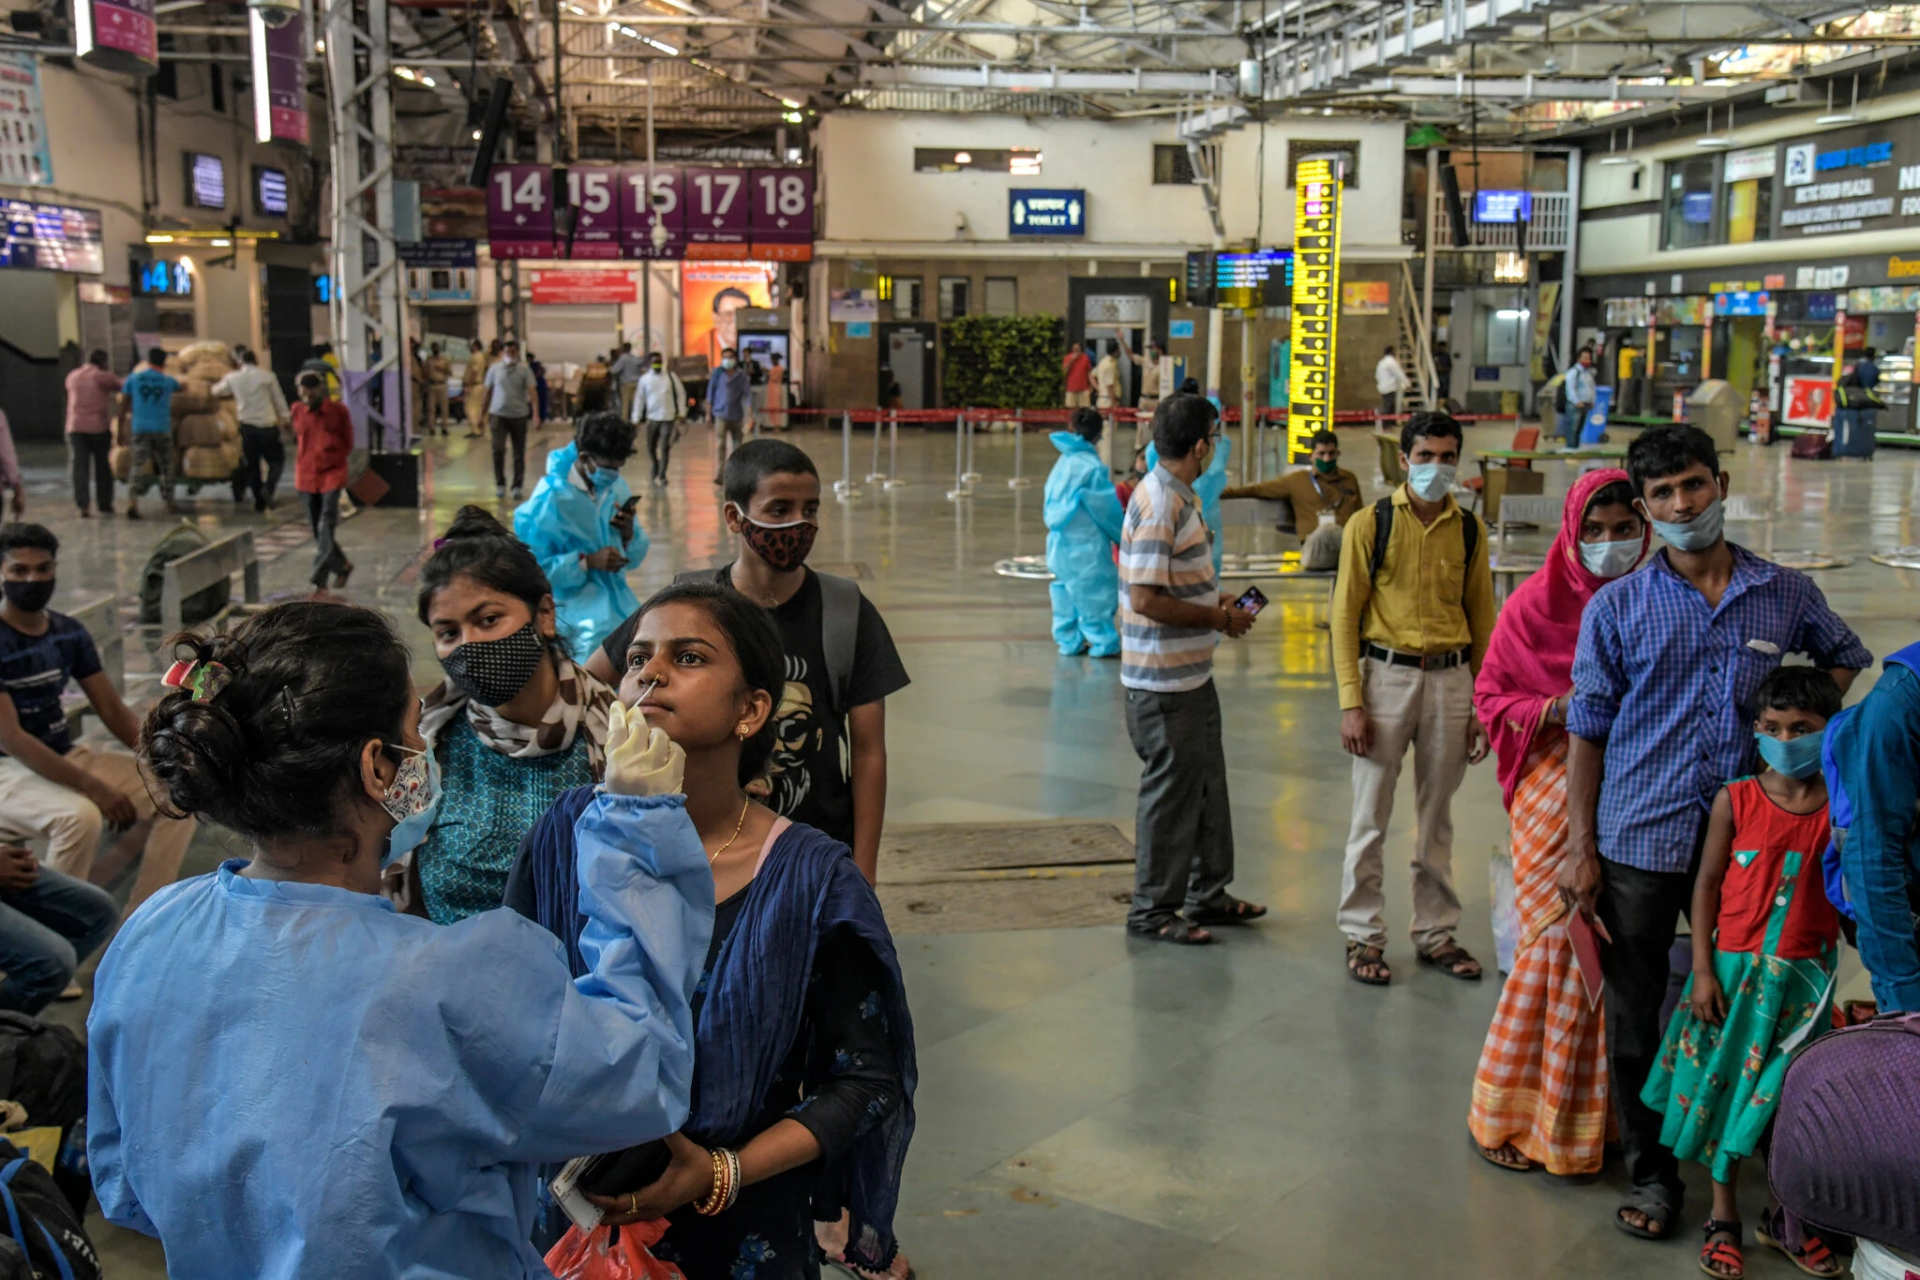 Health workers testing recent arrivals at a train station in Mumbai earlier this month. (Photo: New York Times)